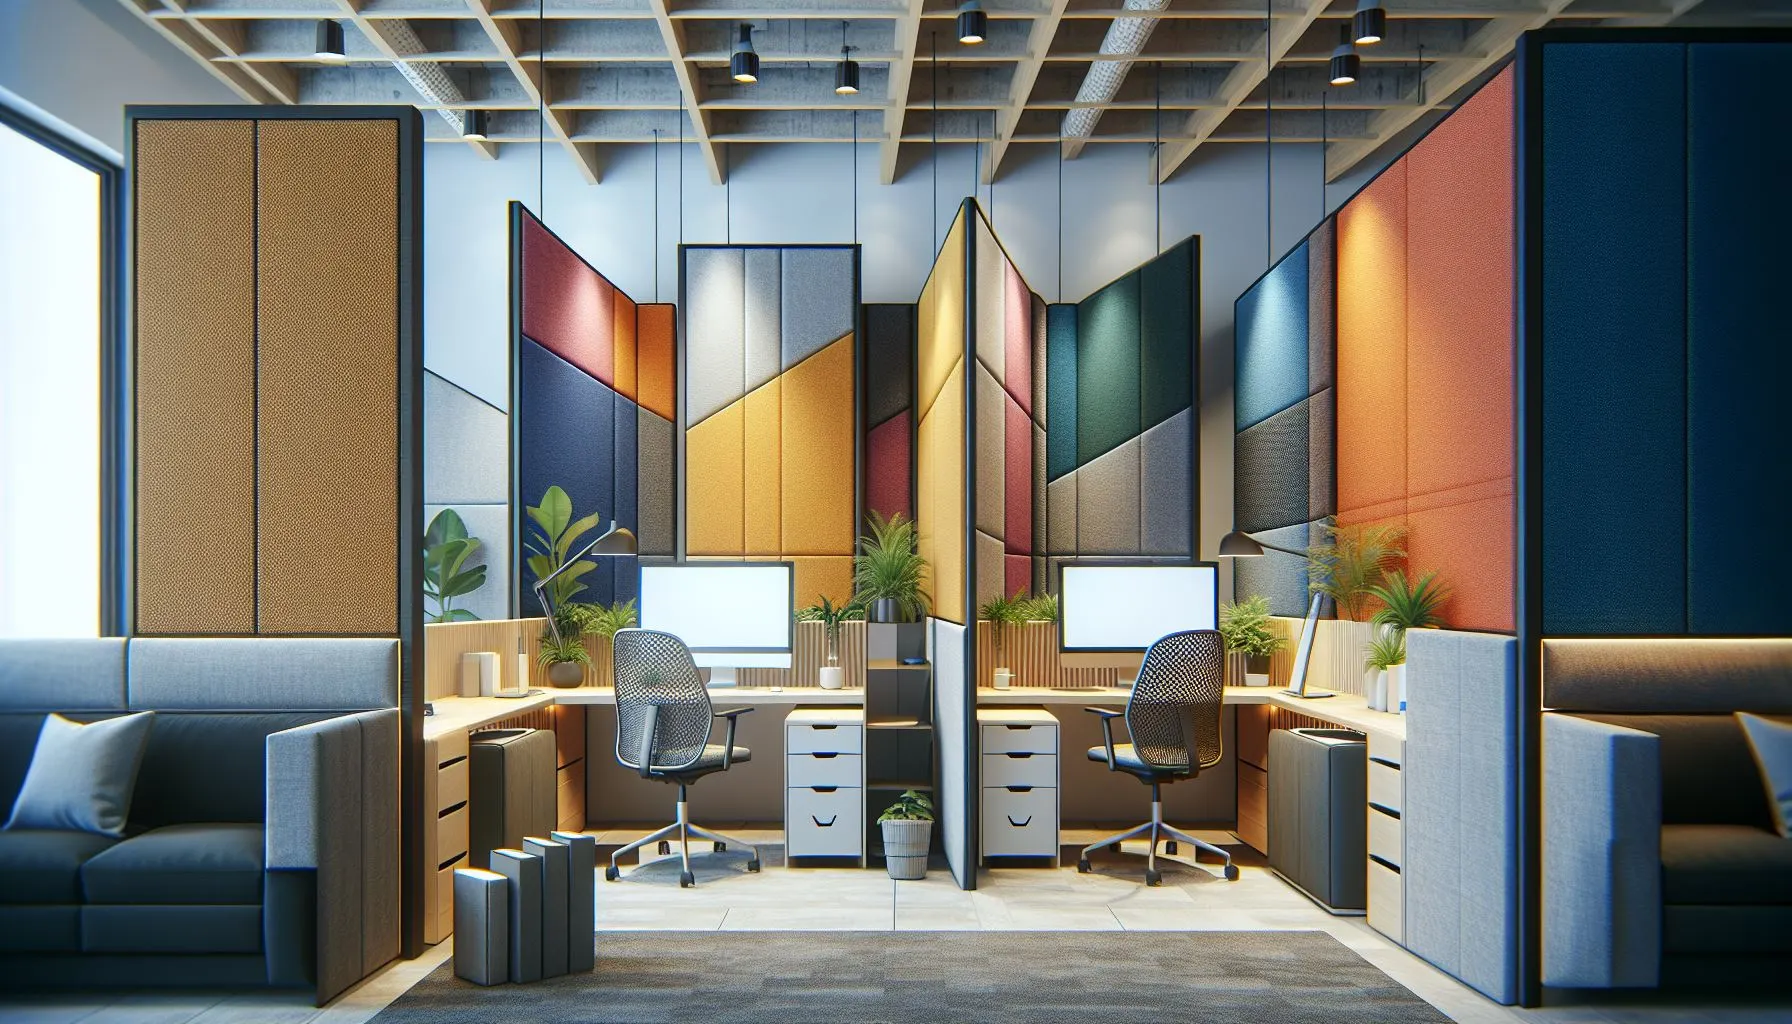  Fabric-Covered Partitions - Style and Sound Absorption - Office Renovation Singapore